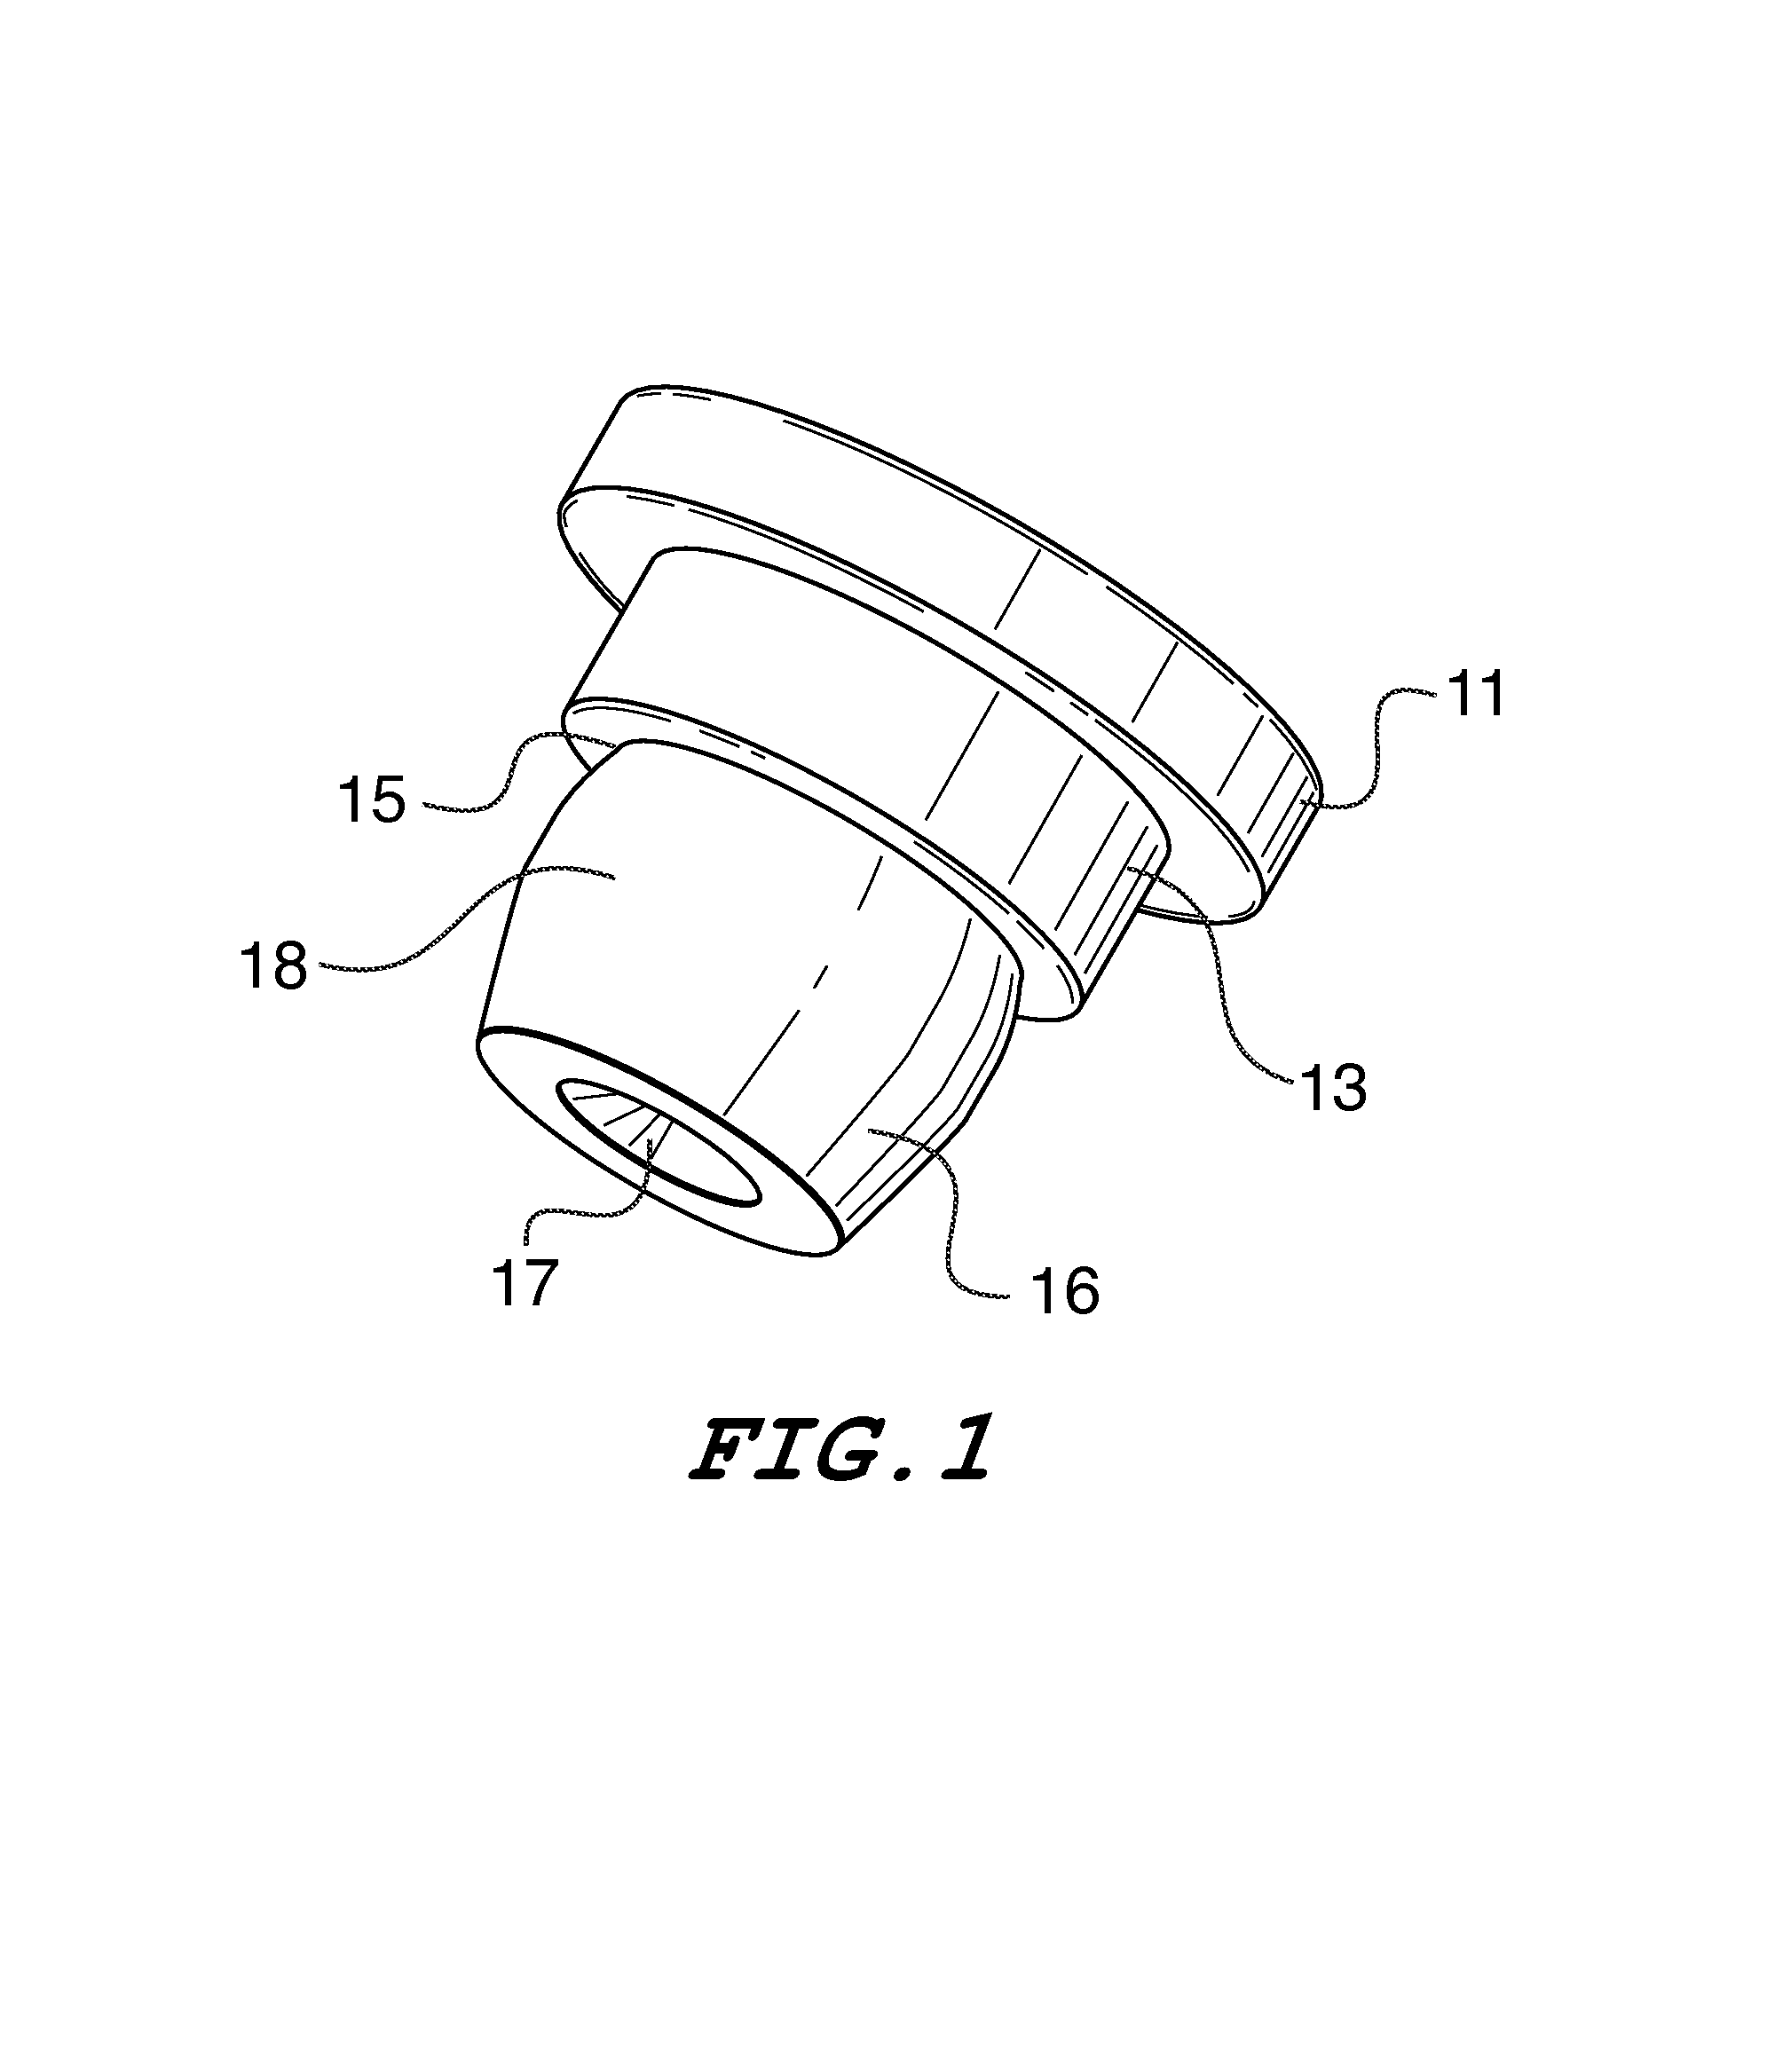 Method of manufacturing a clinch pin fastener